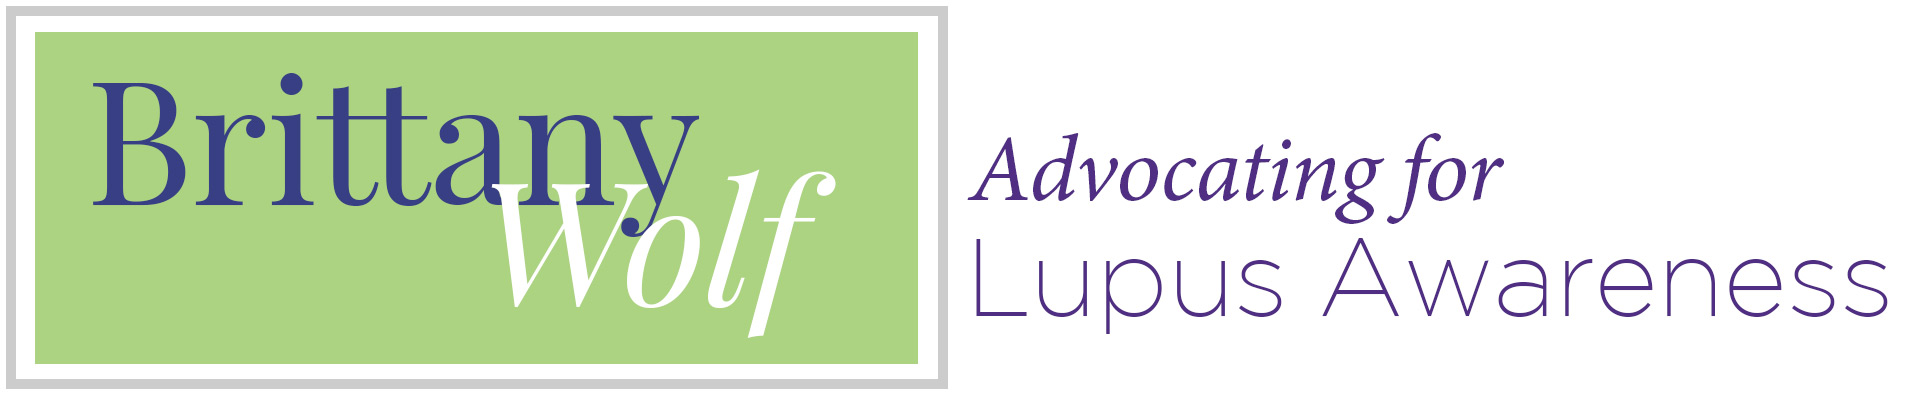 Brittany Wolf, Advocating for Lupus Awareness